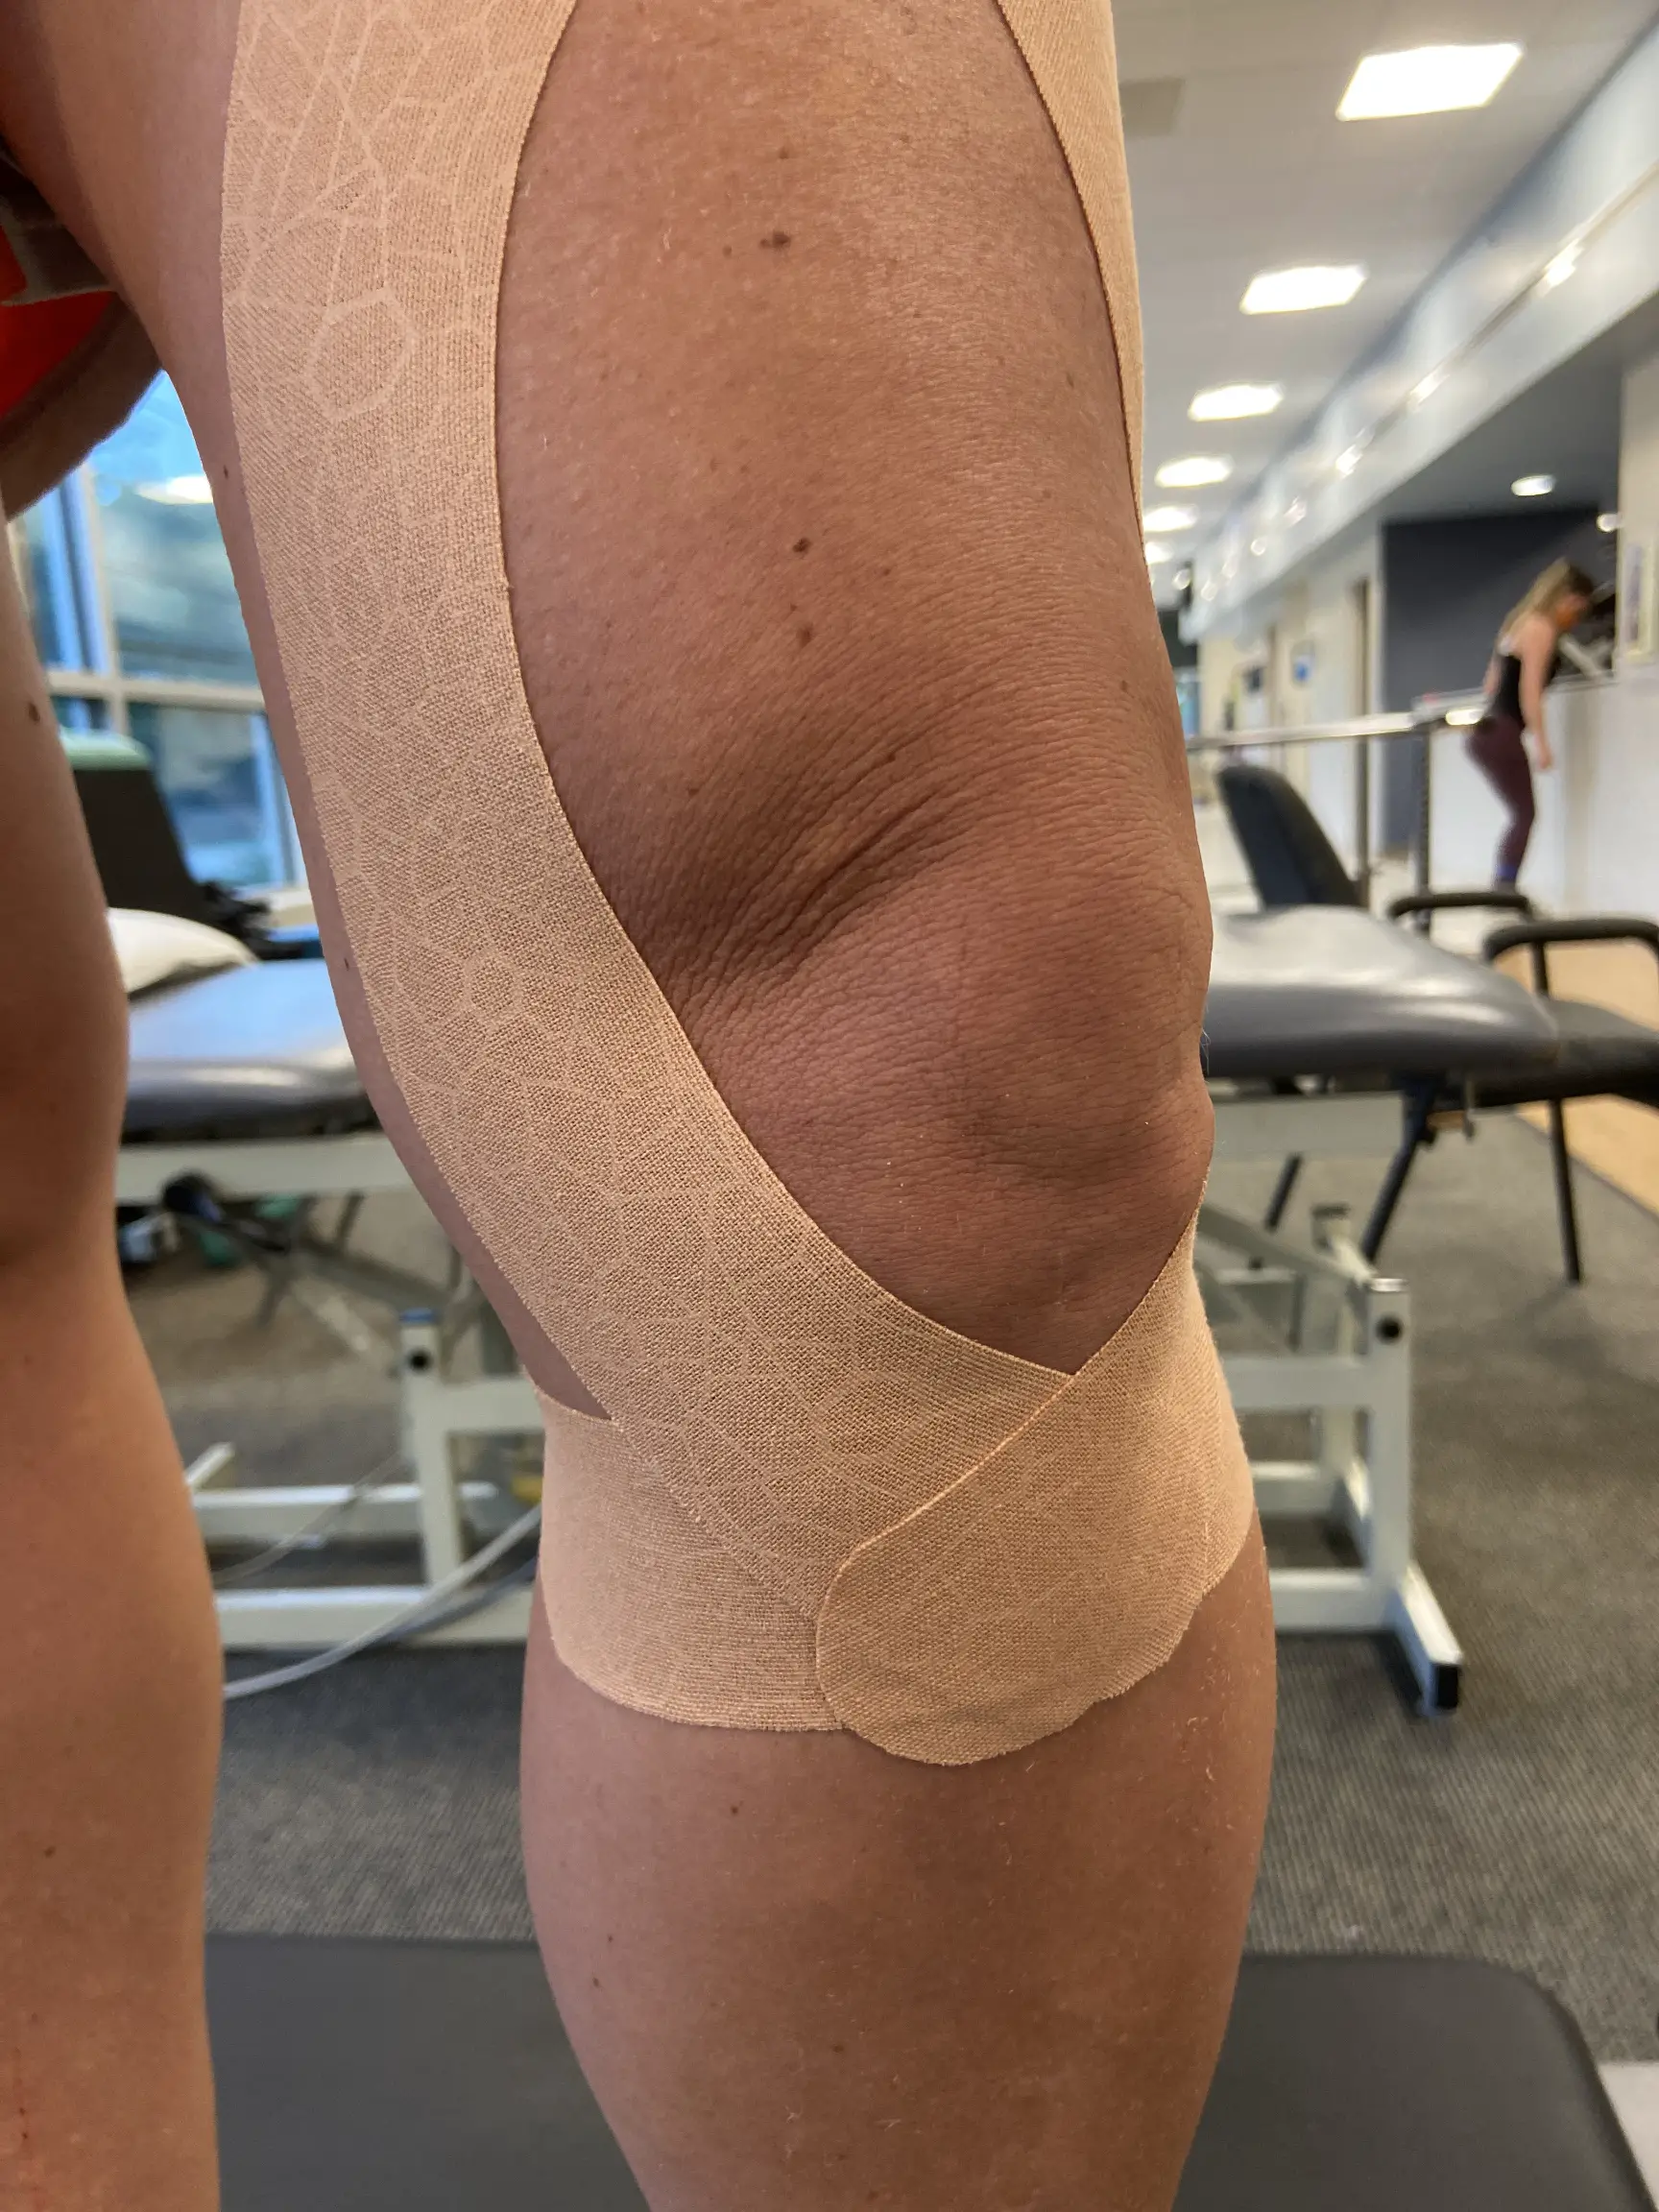 KT Tape - Get a leg up on discomfort! Discover how KT Taping can address  outer knee and IT band woes, promoting better movement and recovery